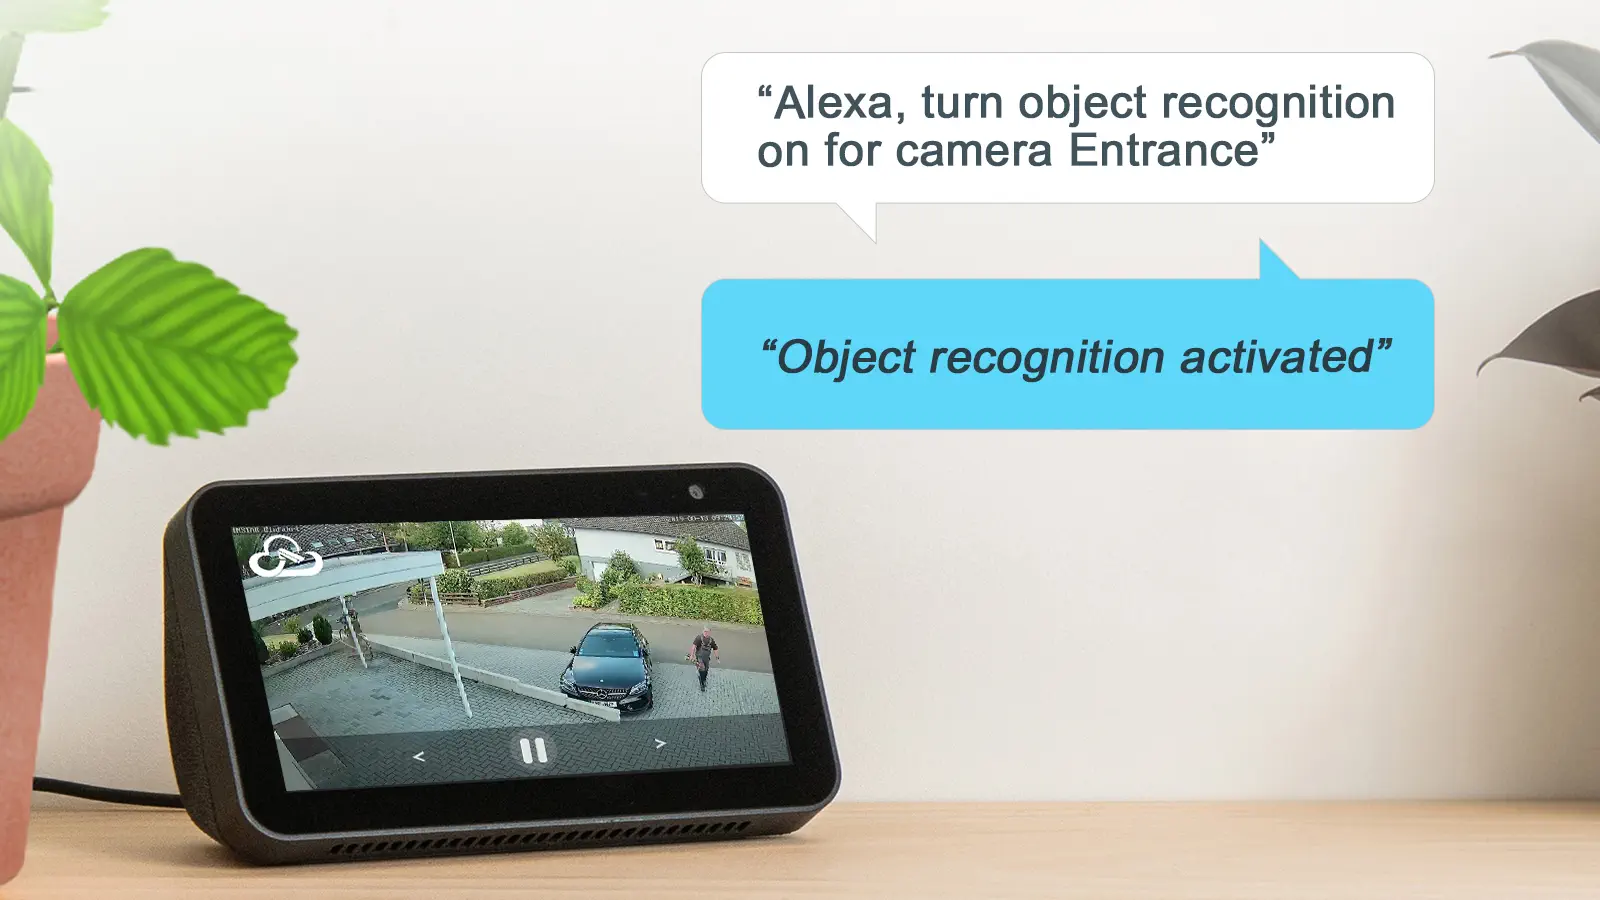 Alexa Change object recognition settings for your camera